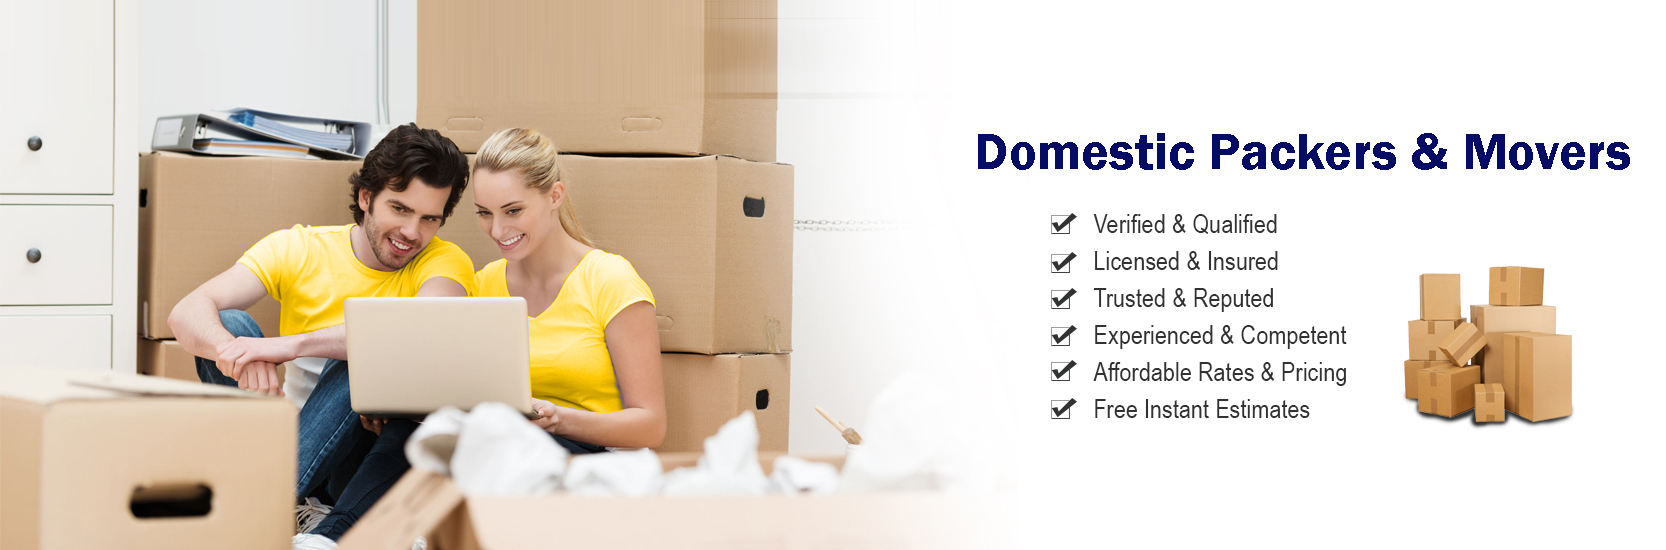 V-Relocate Packers & Movers TRANSPORTATION SERVICES